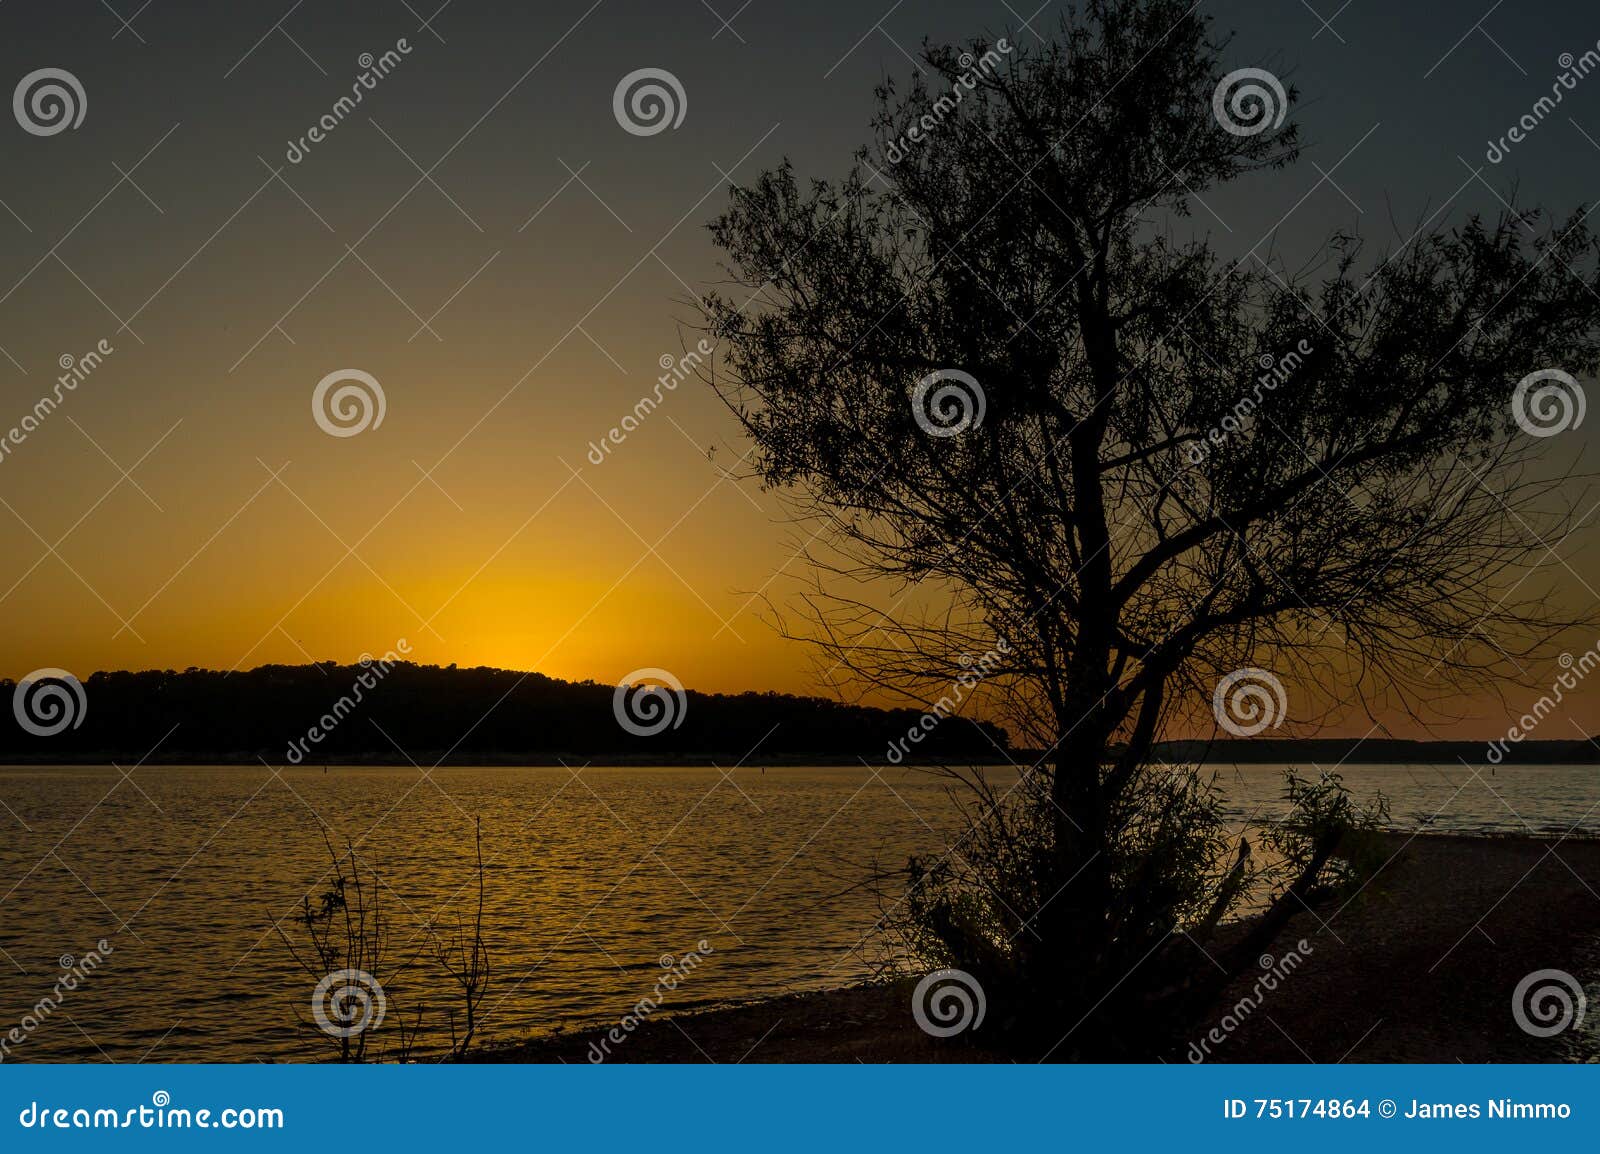 truman lake sunset with tree siloutte